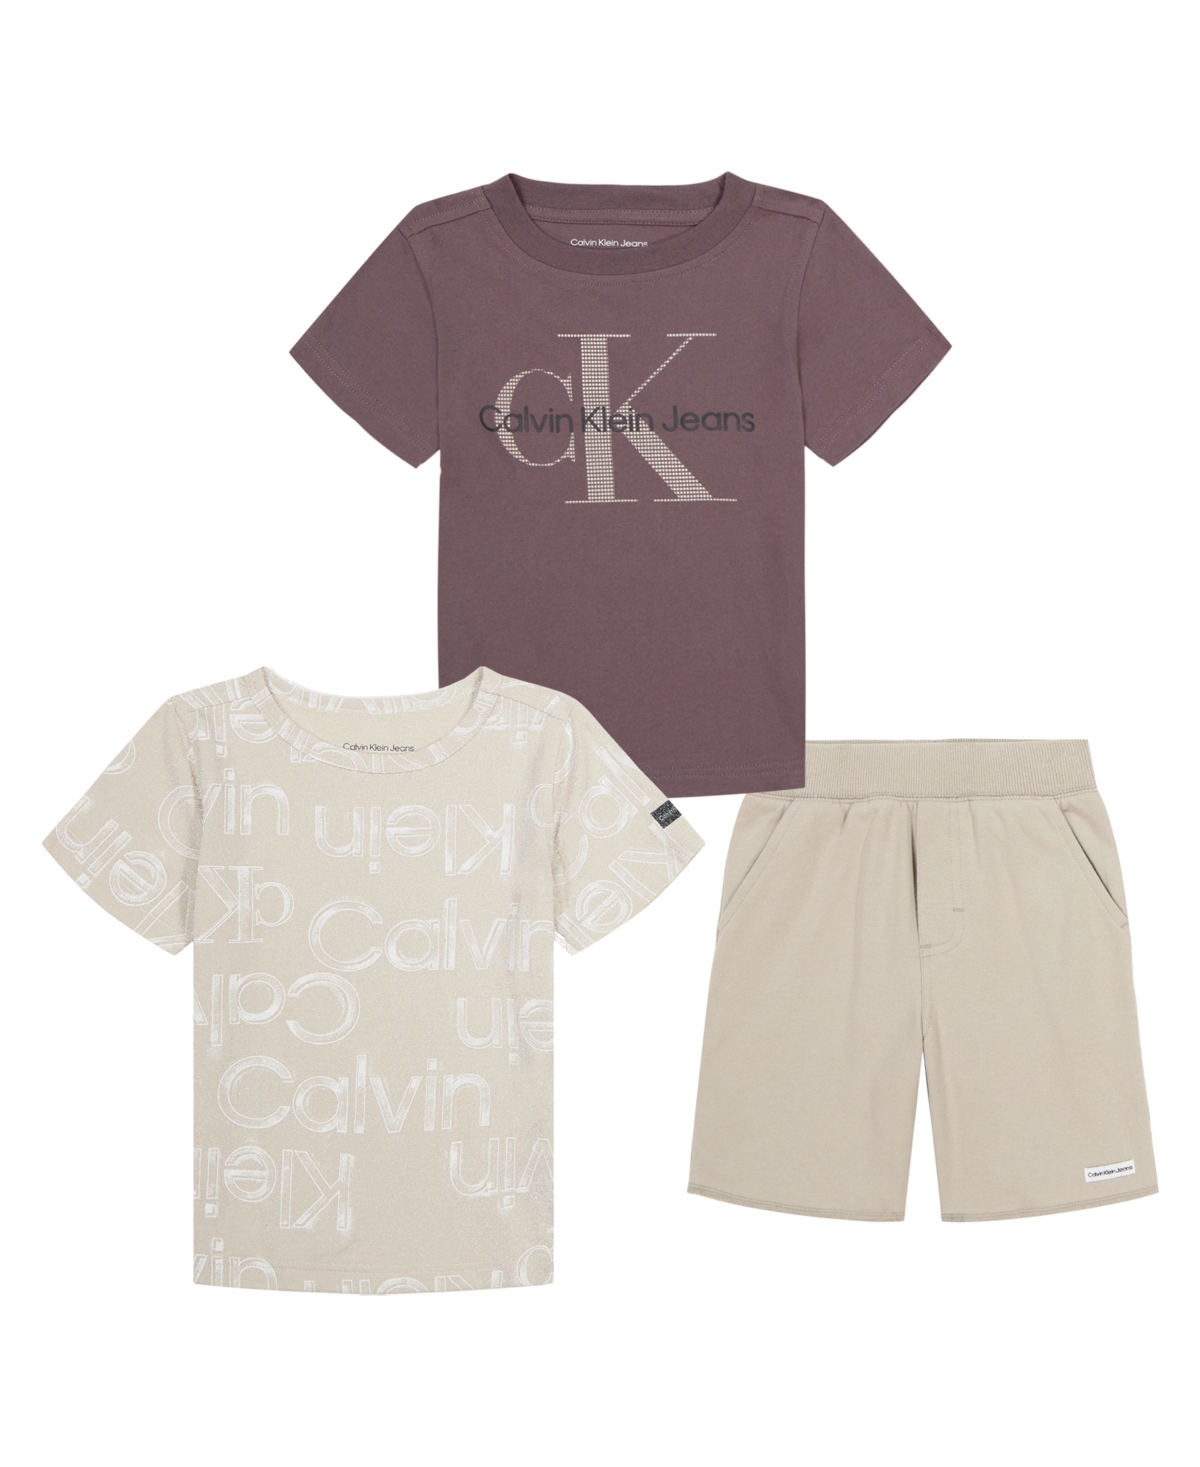 Calvin Klein Kids' Little Boys 3-pc Set- 2 Logo T-shirts And French Terry Shorts In Brown,khaki